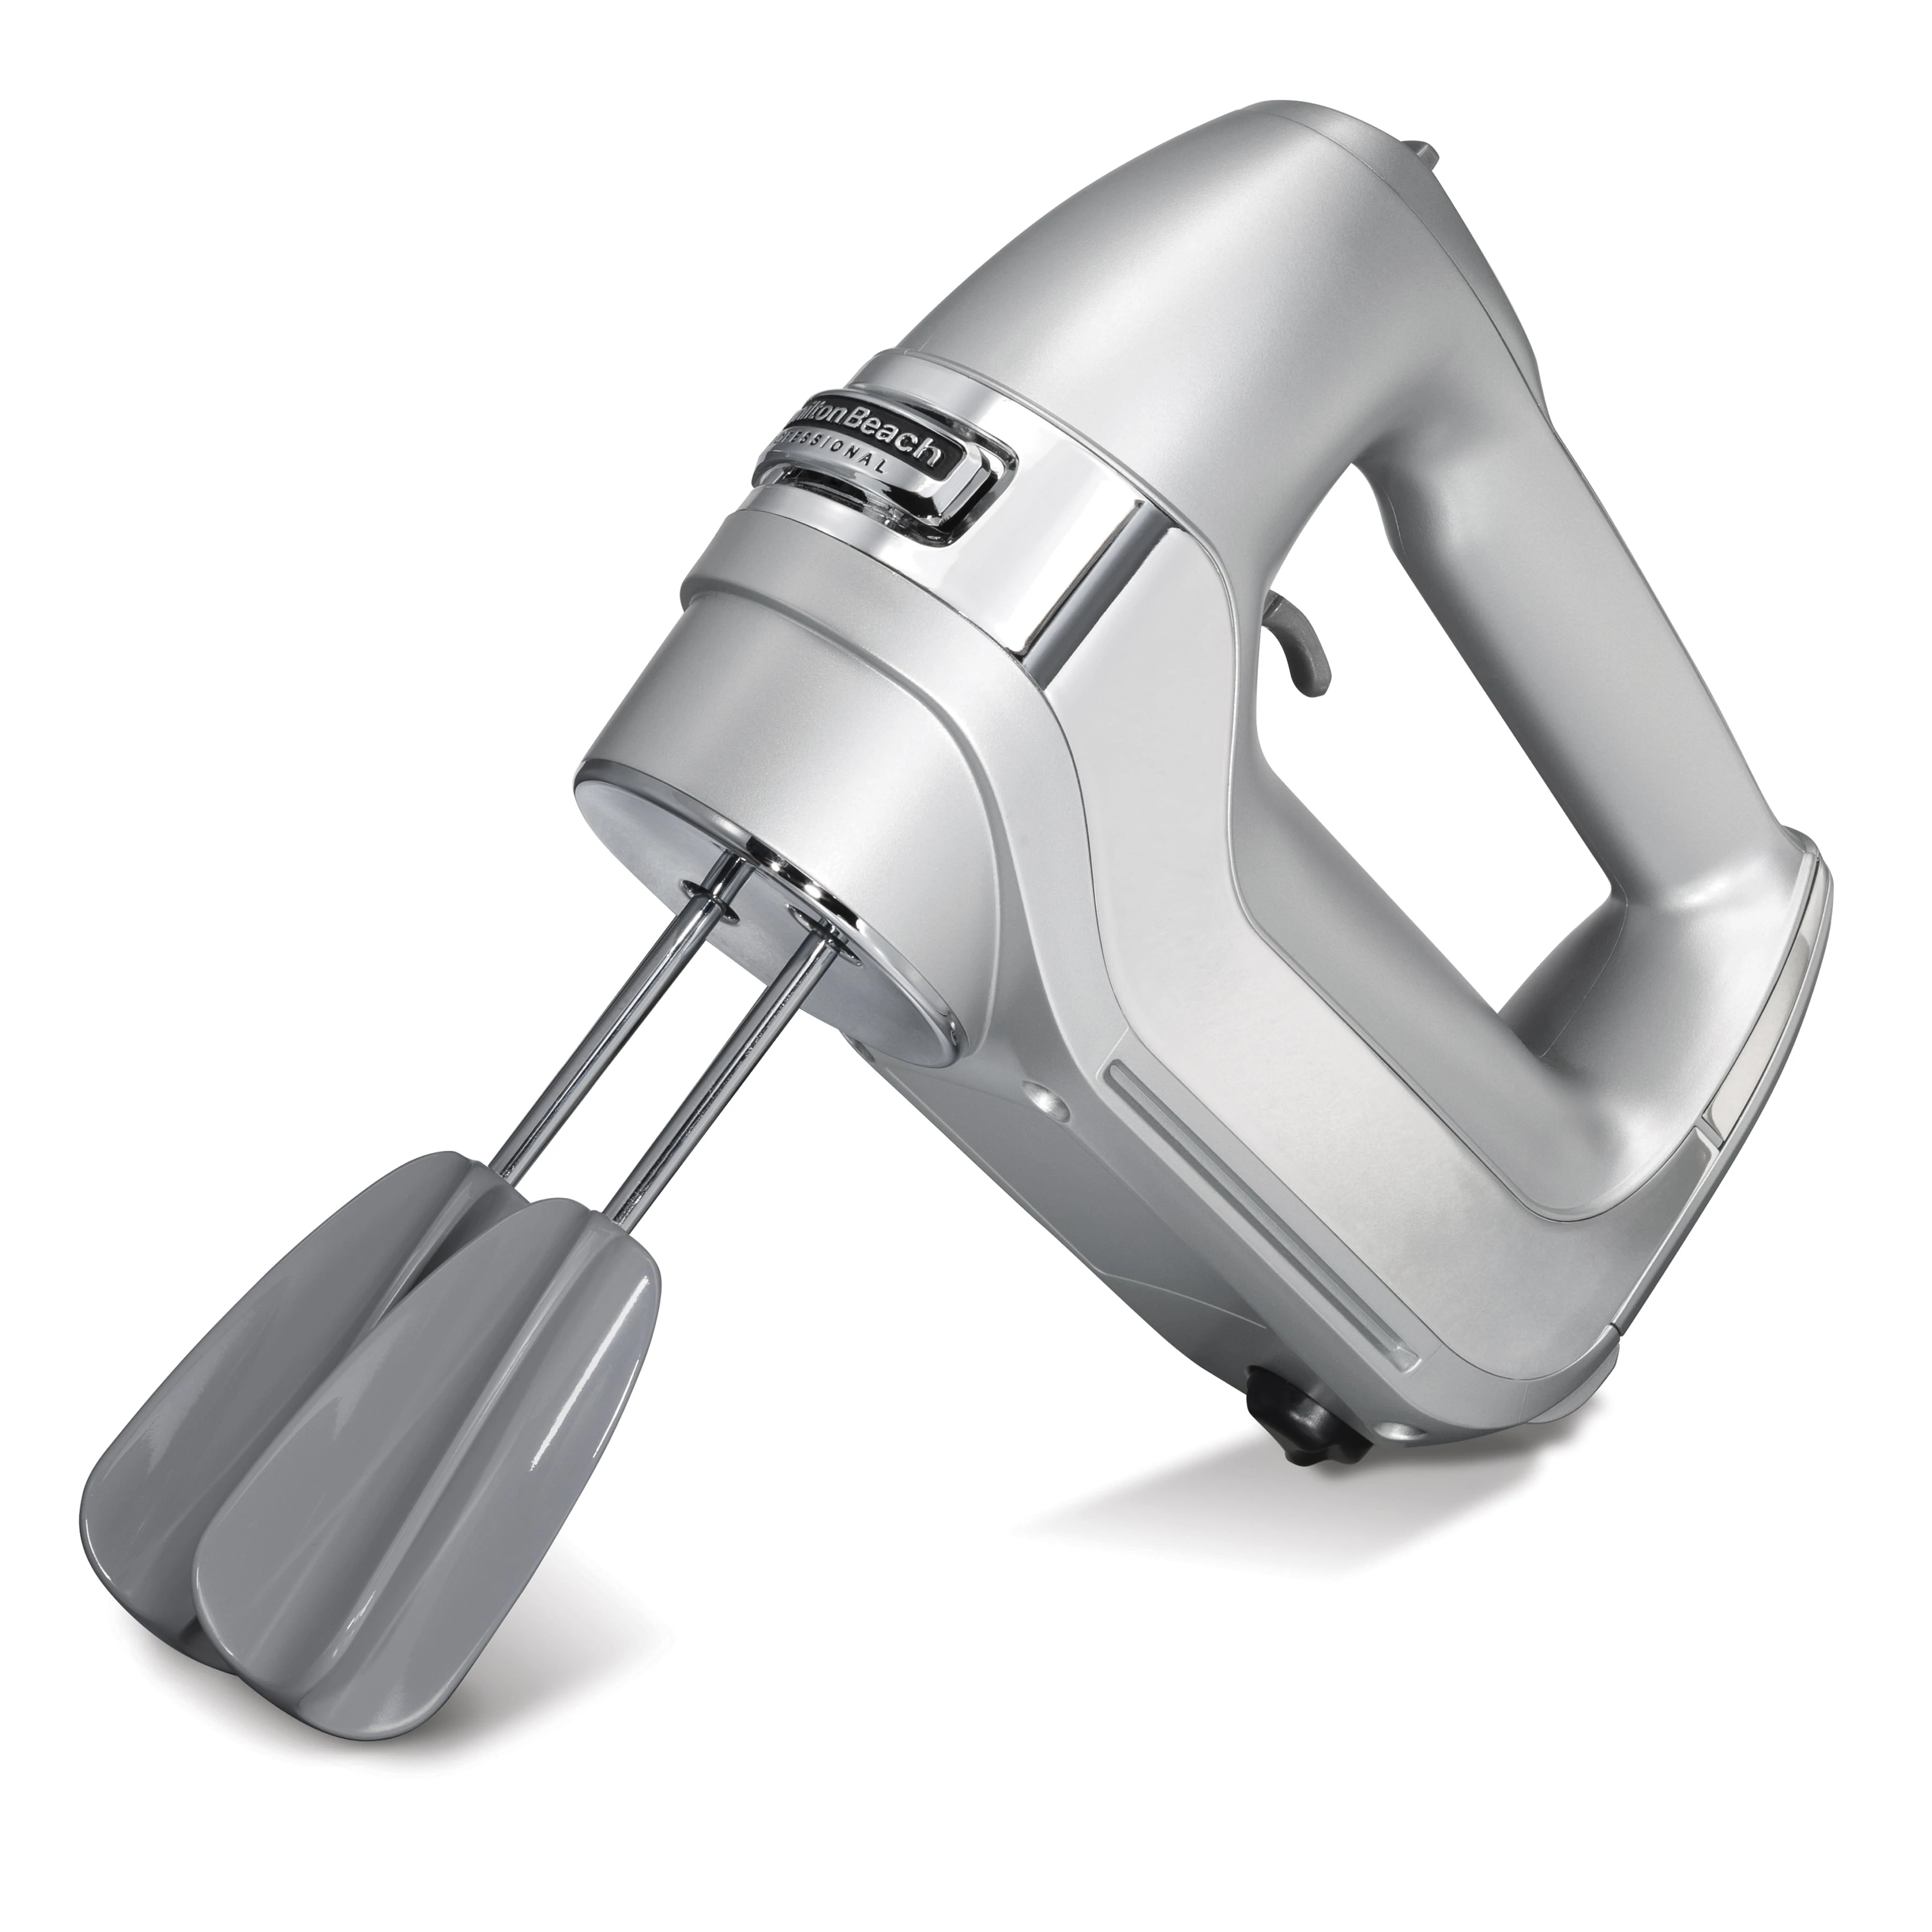 

Professional 5 Speed Hand Mixer, Easy Clean, DC Motor, Silver, 62664